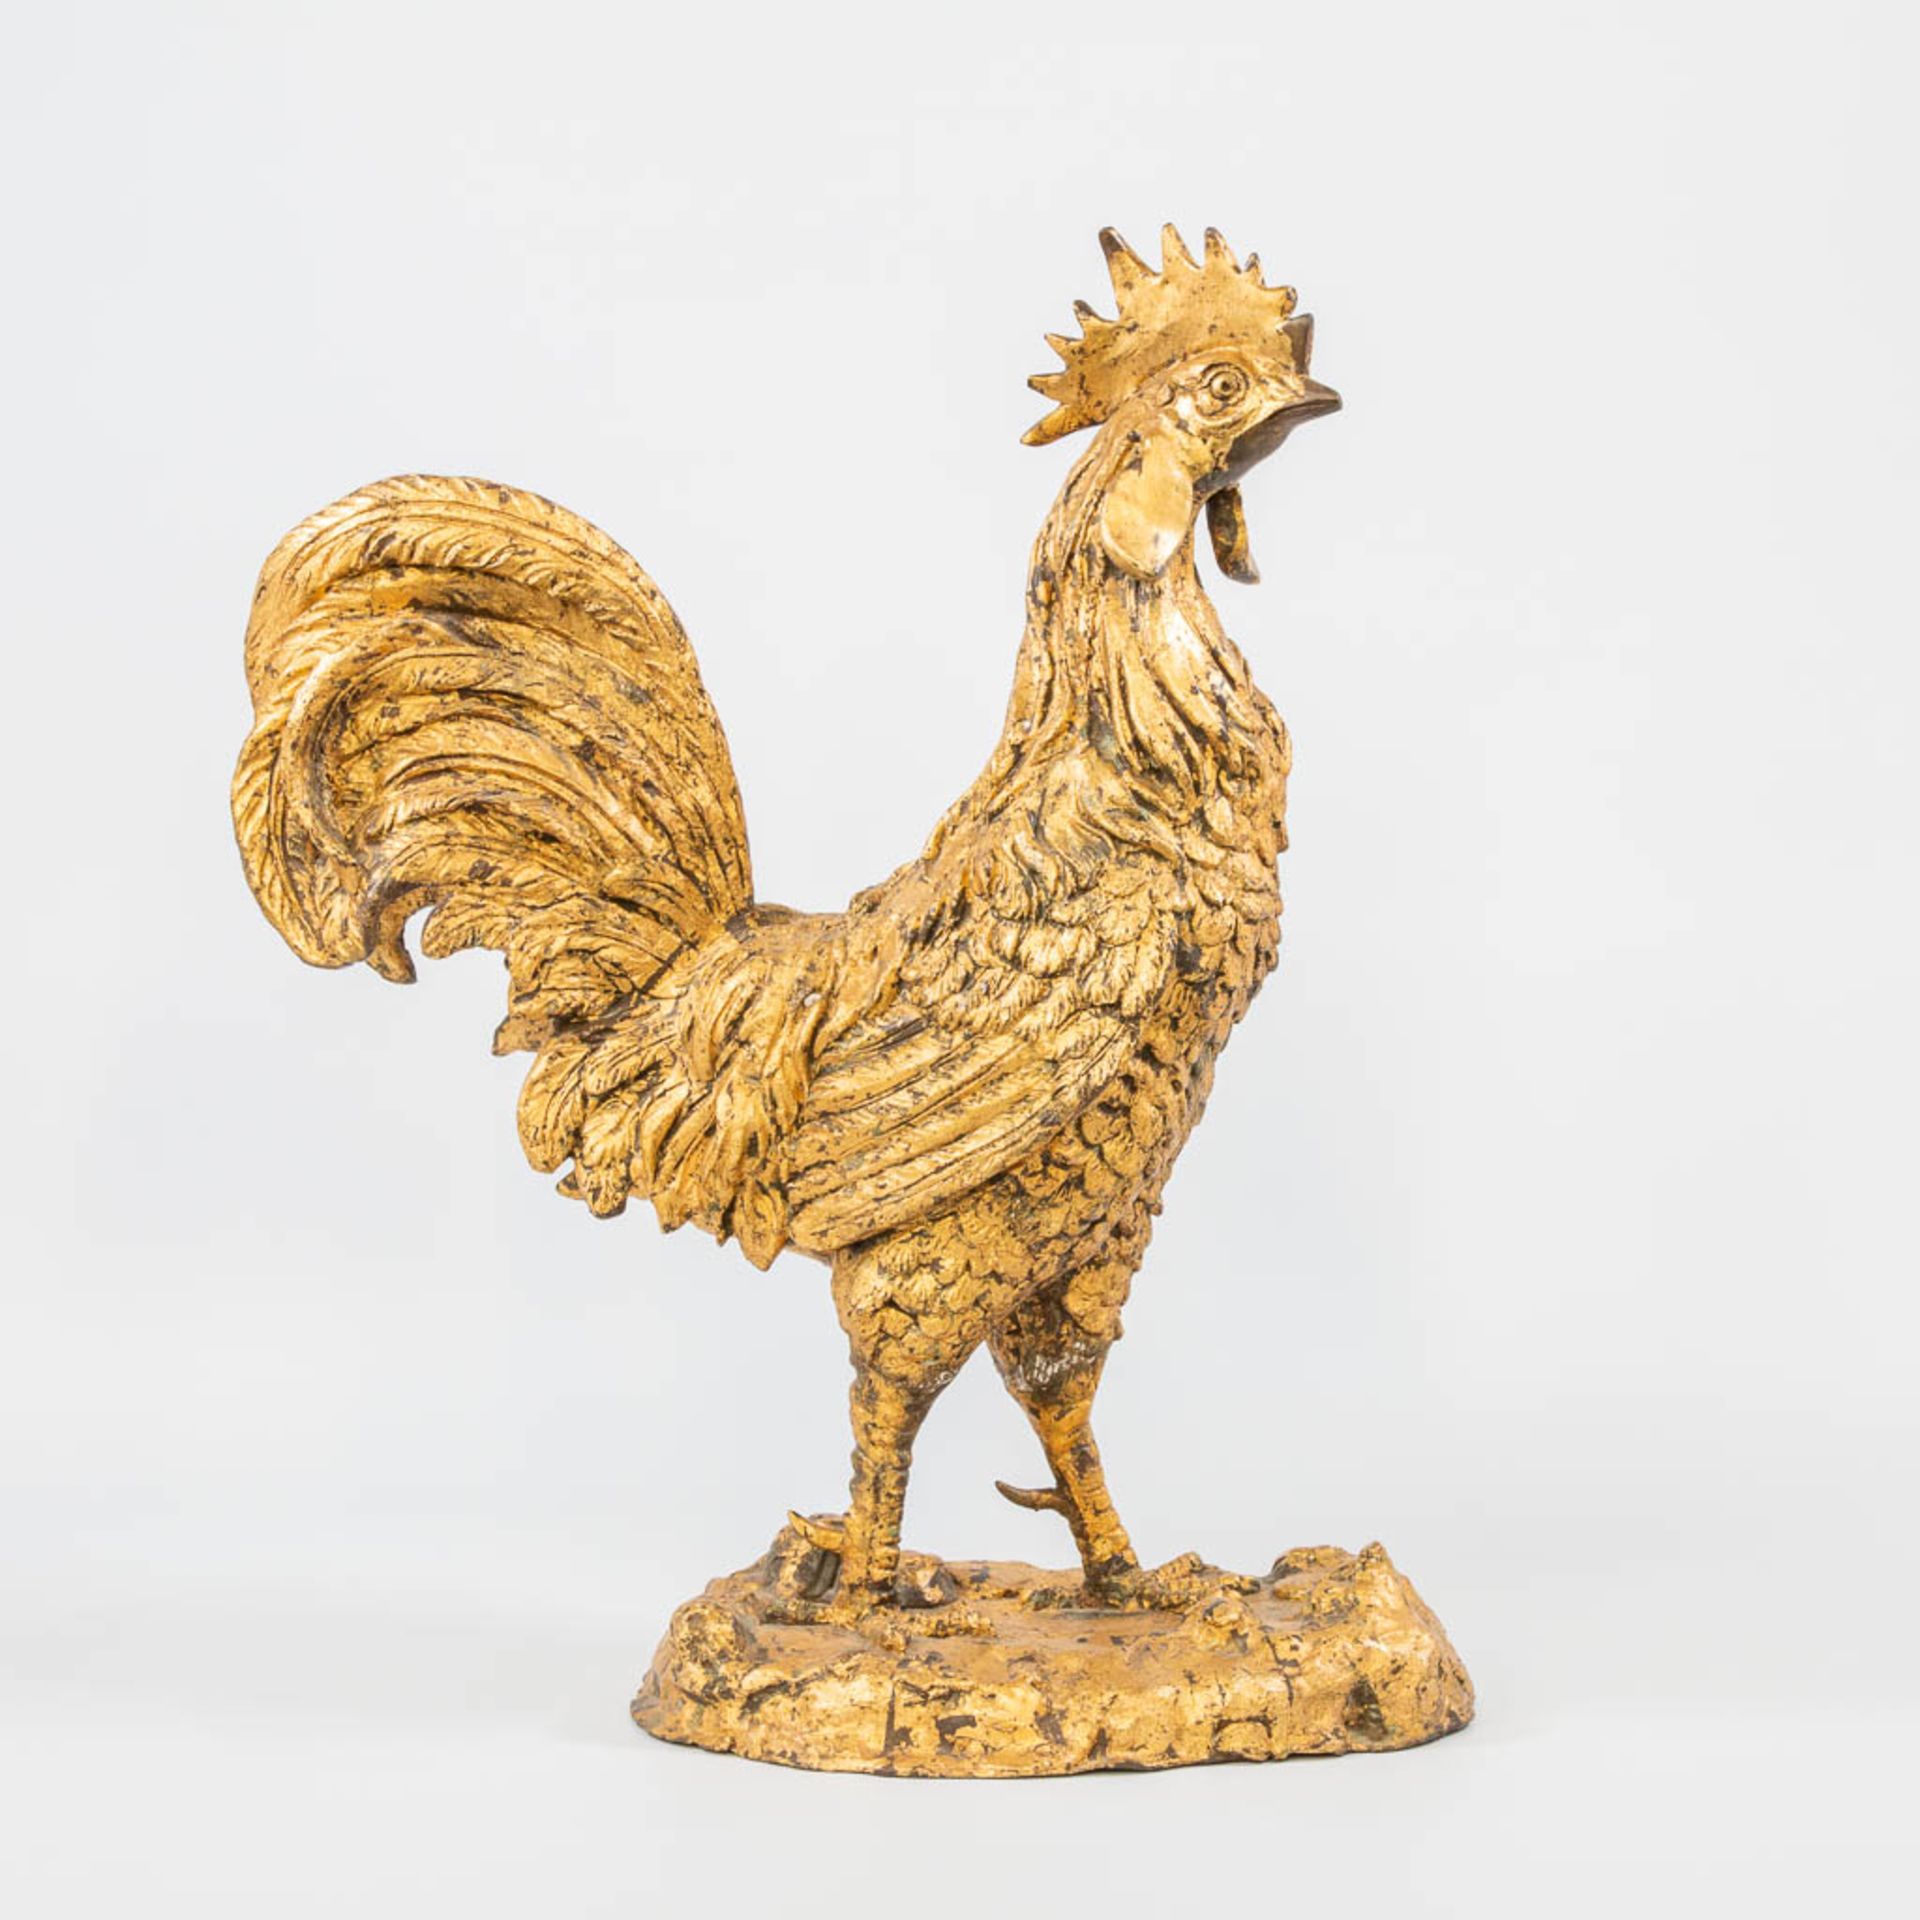 A gold plated bronze statue of a rooster.